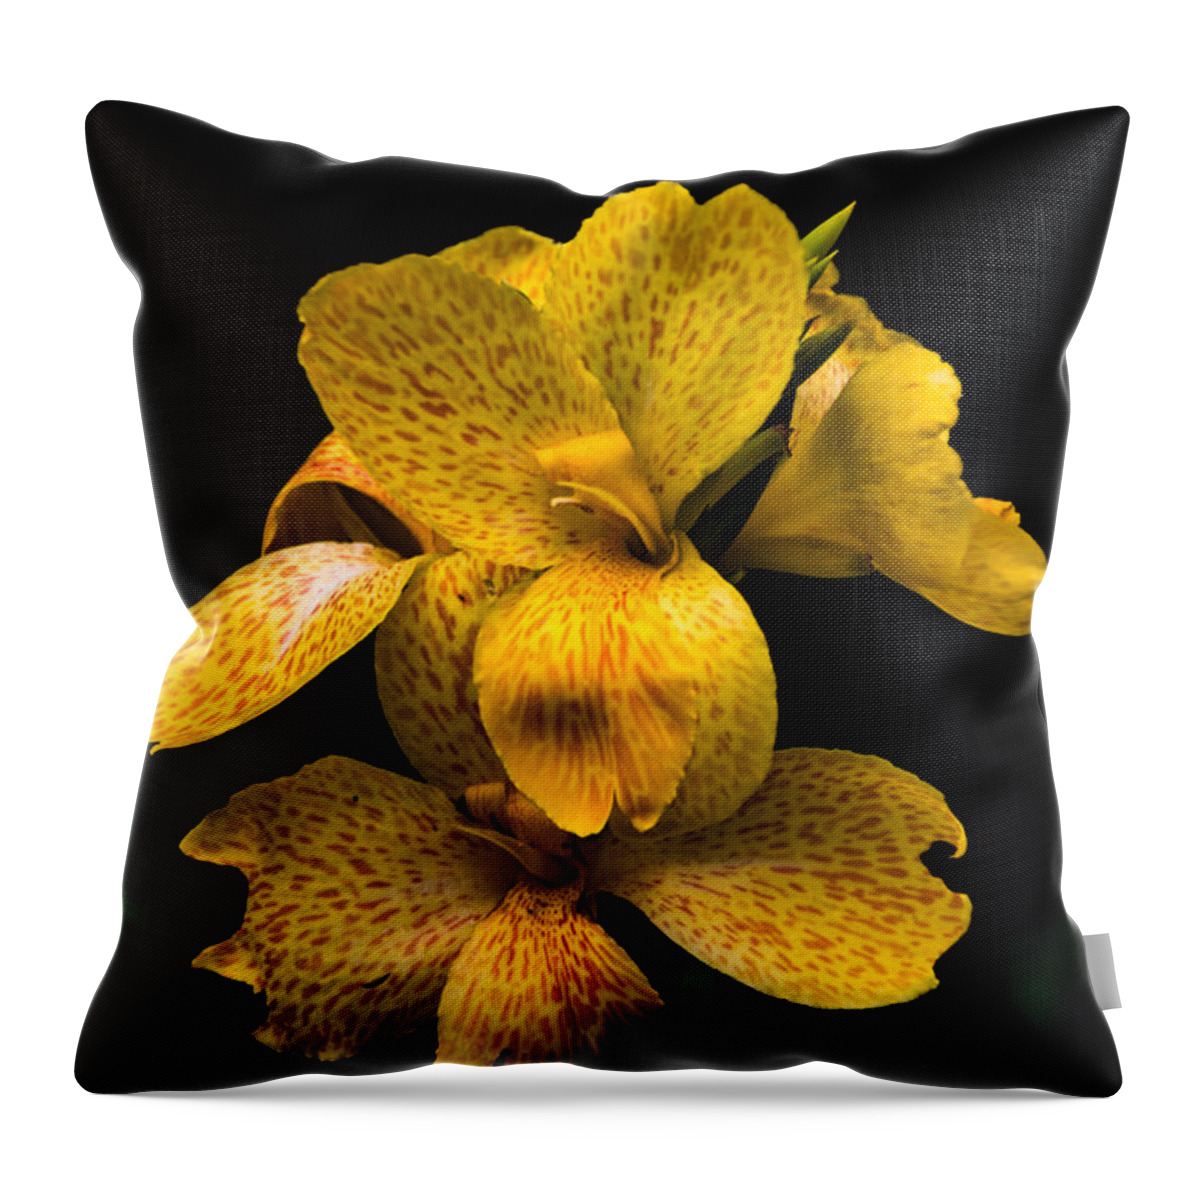 Jay Stockhaus Throw Pillow featuring the photograph Yellow Canna Lily by Jay Stockhaus